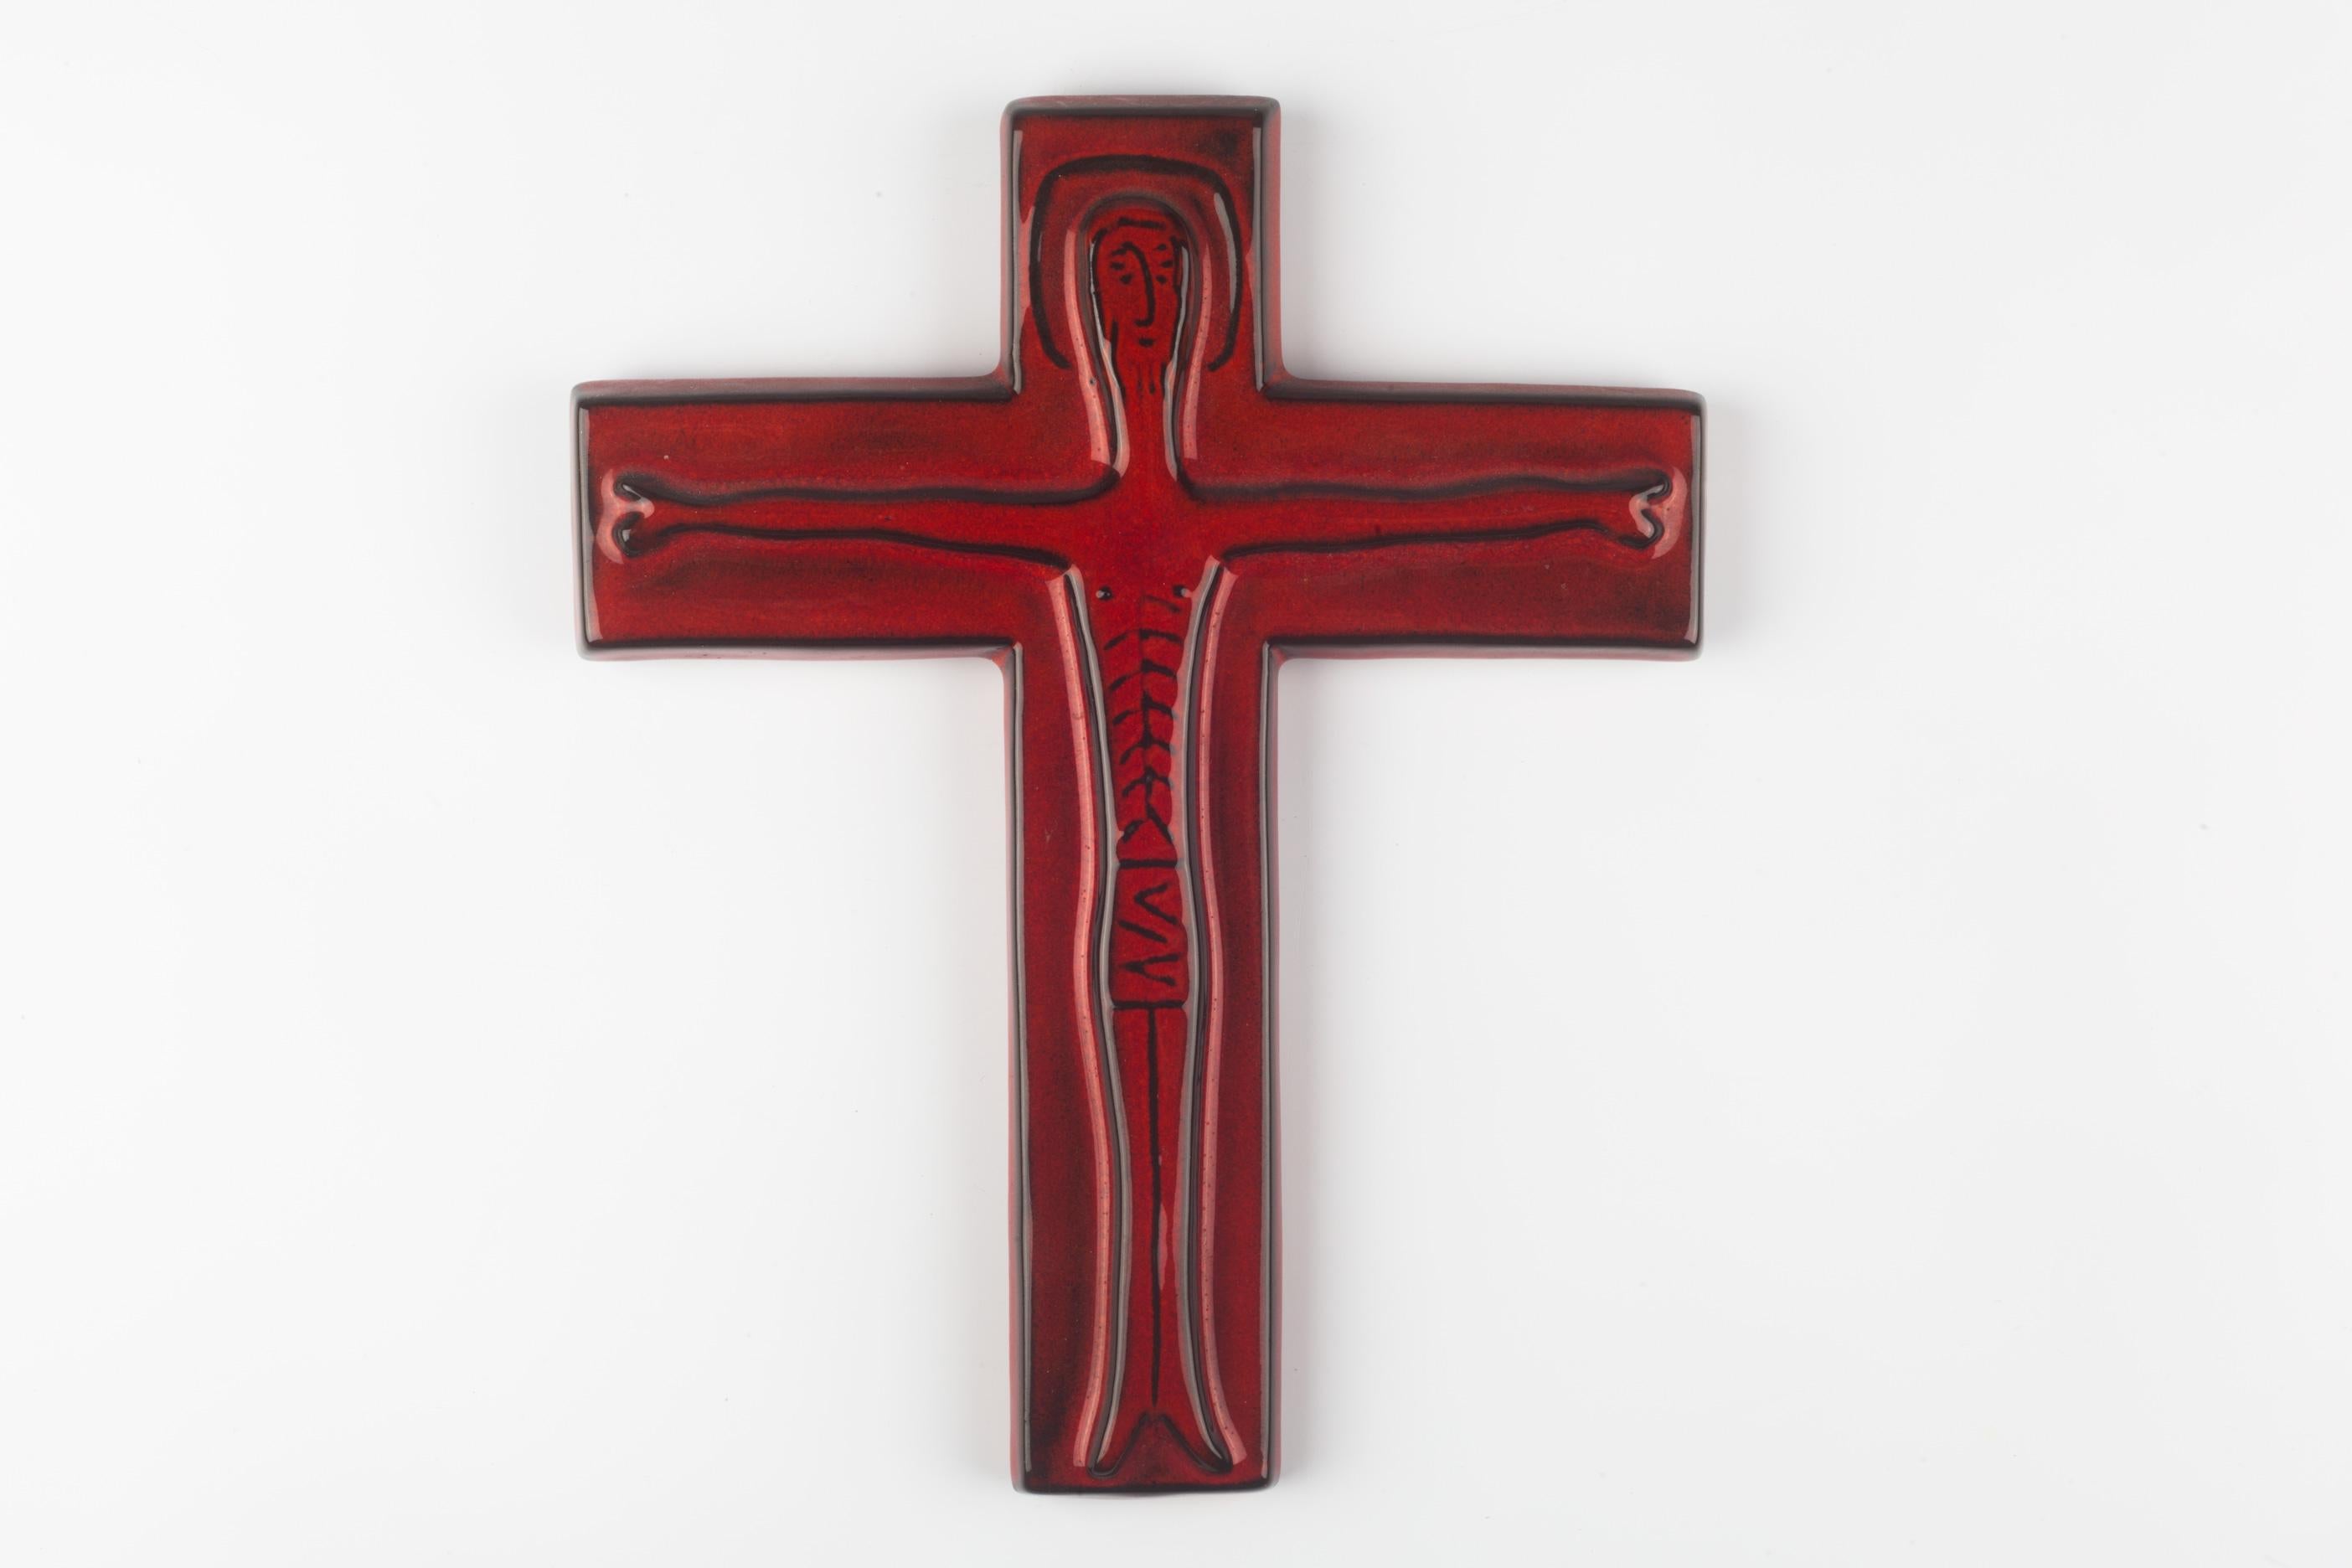 Handmade ceramic wall cross, artisan made in Belgium in the 1960s. Hand-painted in deep red with black contours. Finished in high-gloss glaze. Original and modern interpretation of the Christ figure that can easily be re-imagined as one of today's